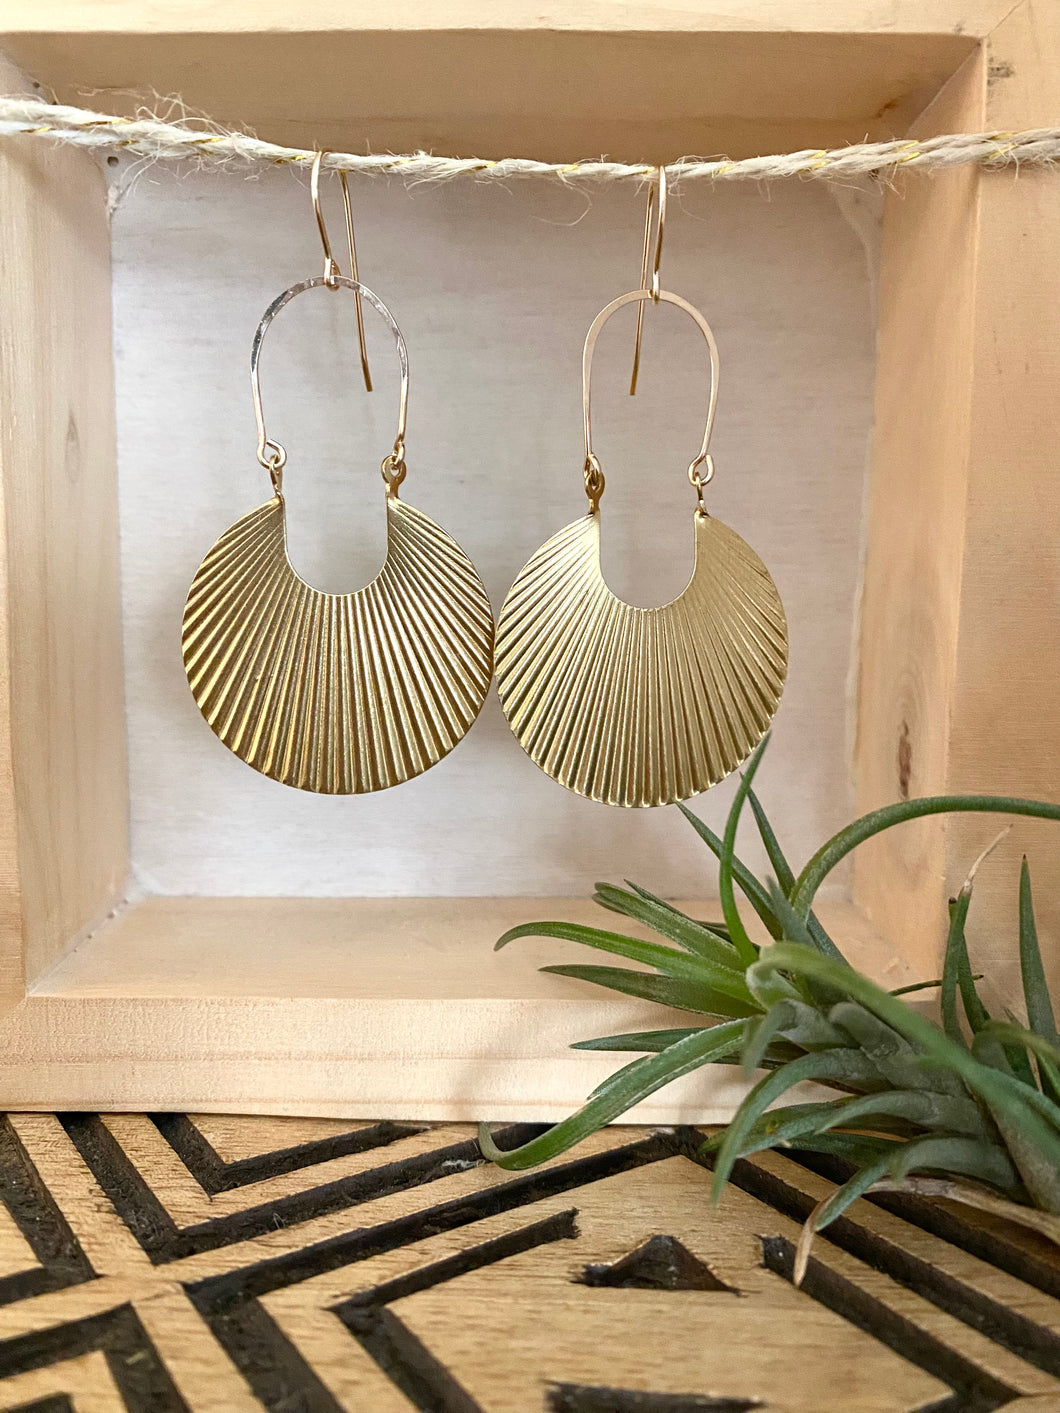 Shield earrings with 14k gold filled ear wires